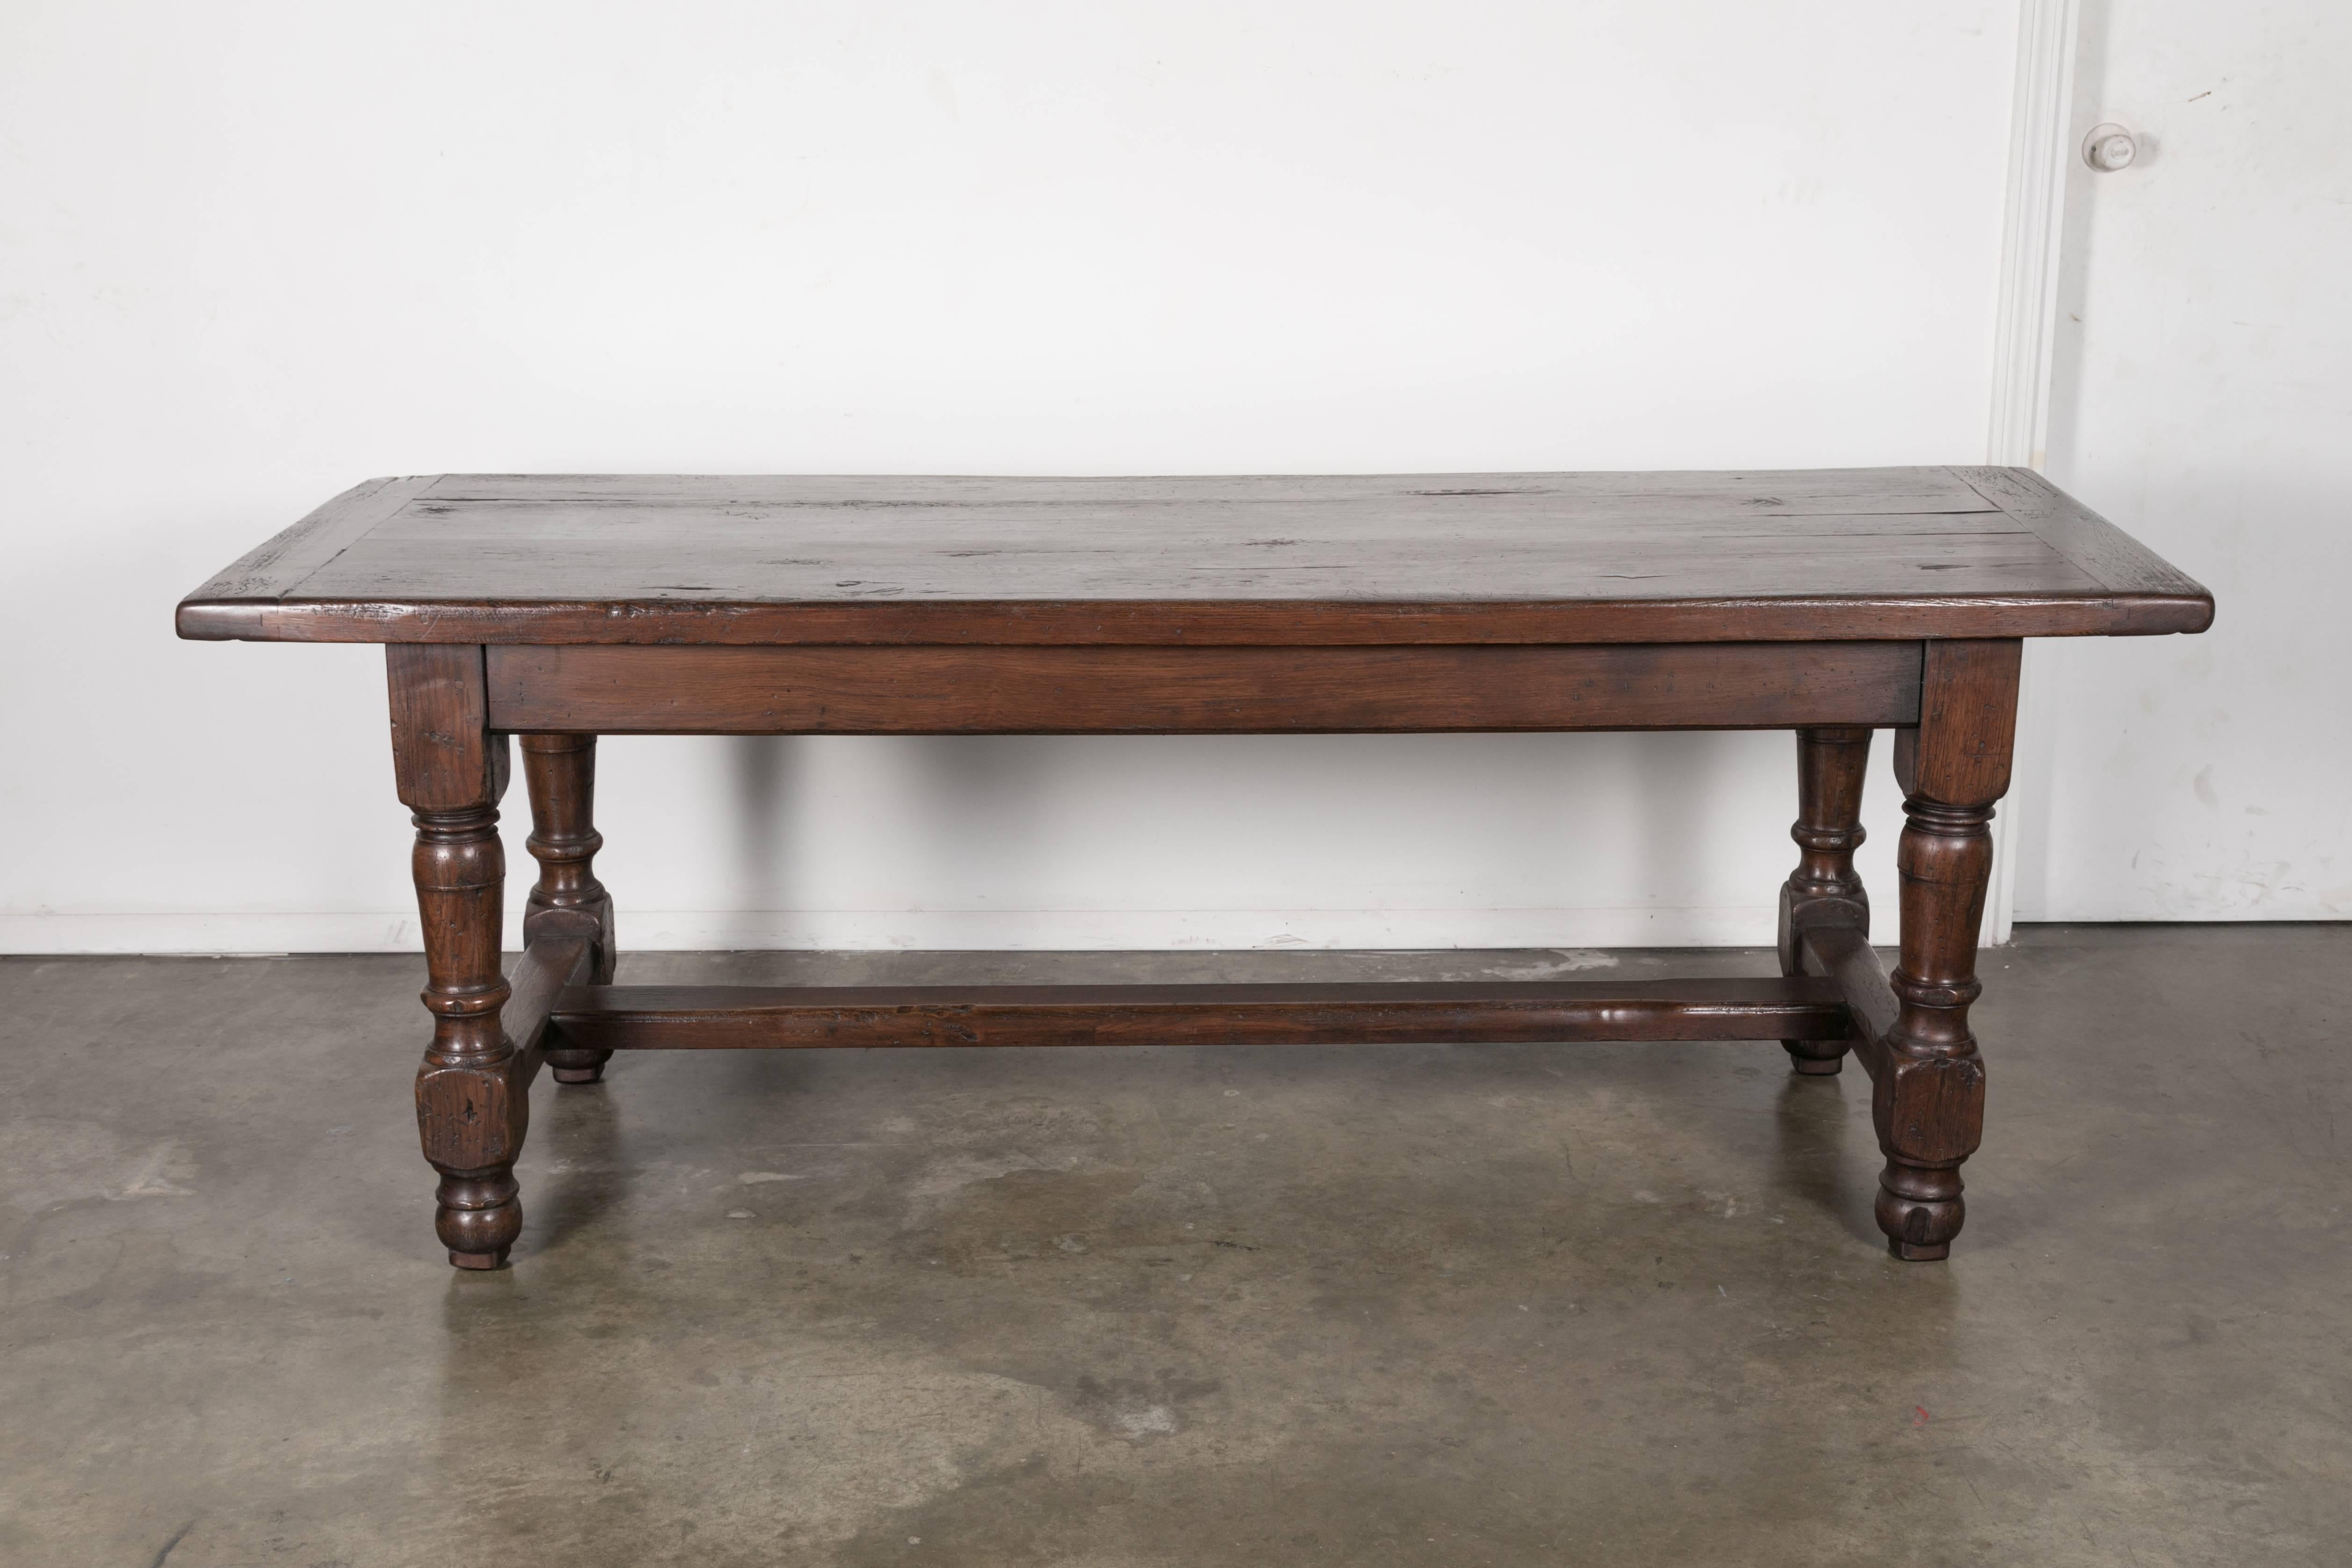 19th century French Louis Philippe farm table, circa 1890s, in solid oak from the Normandie region. It has a rectangular plank top with a drawer on one end, resting on four turned legs joined by an H-stretcher. Handsome grain pattern with rich,